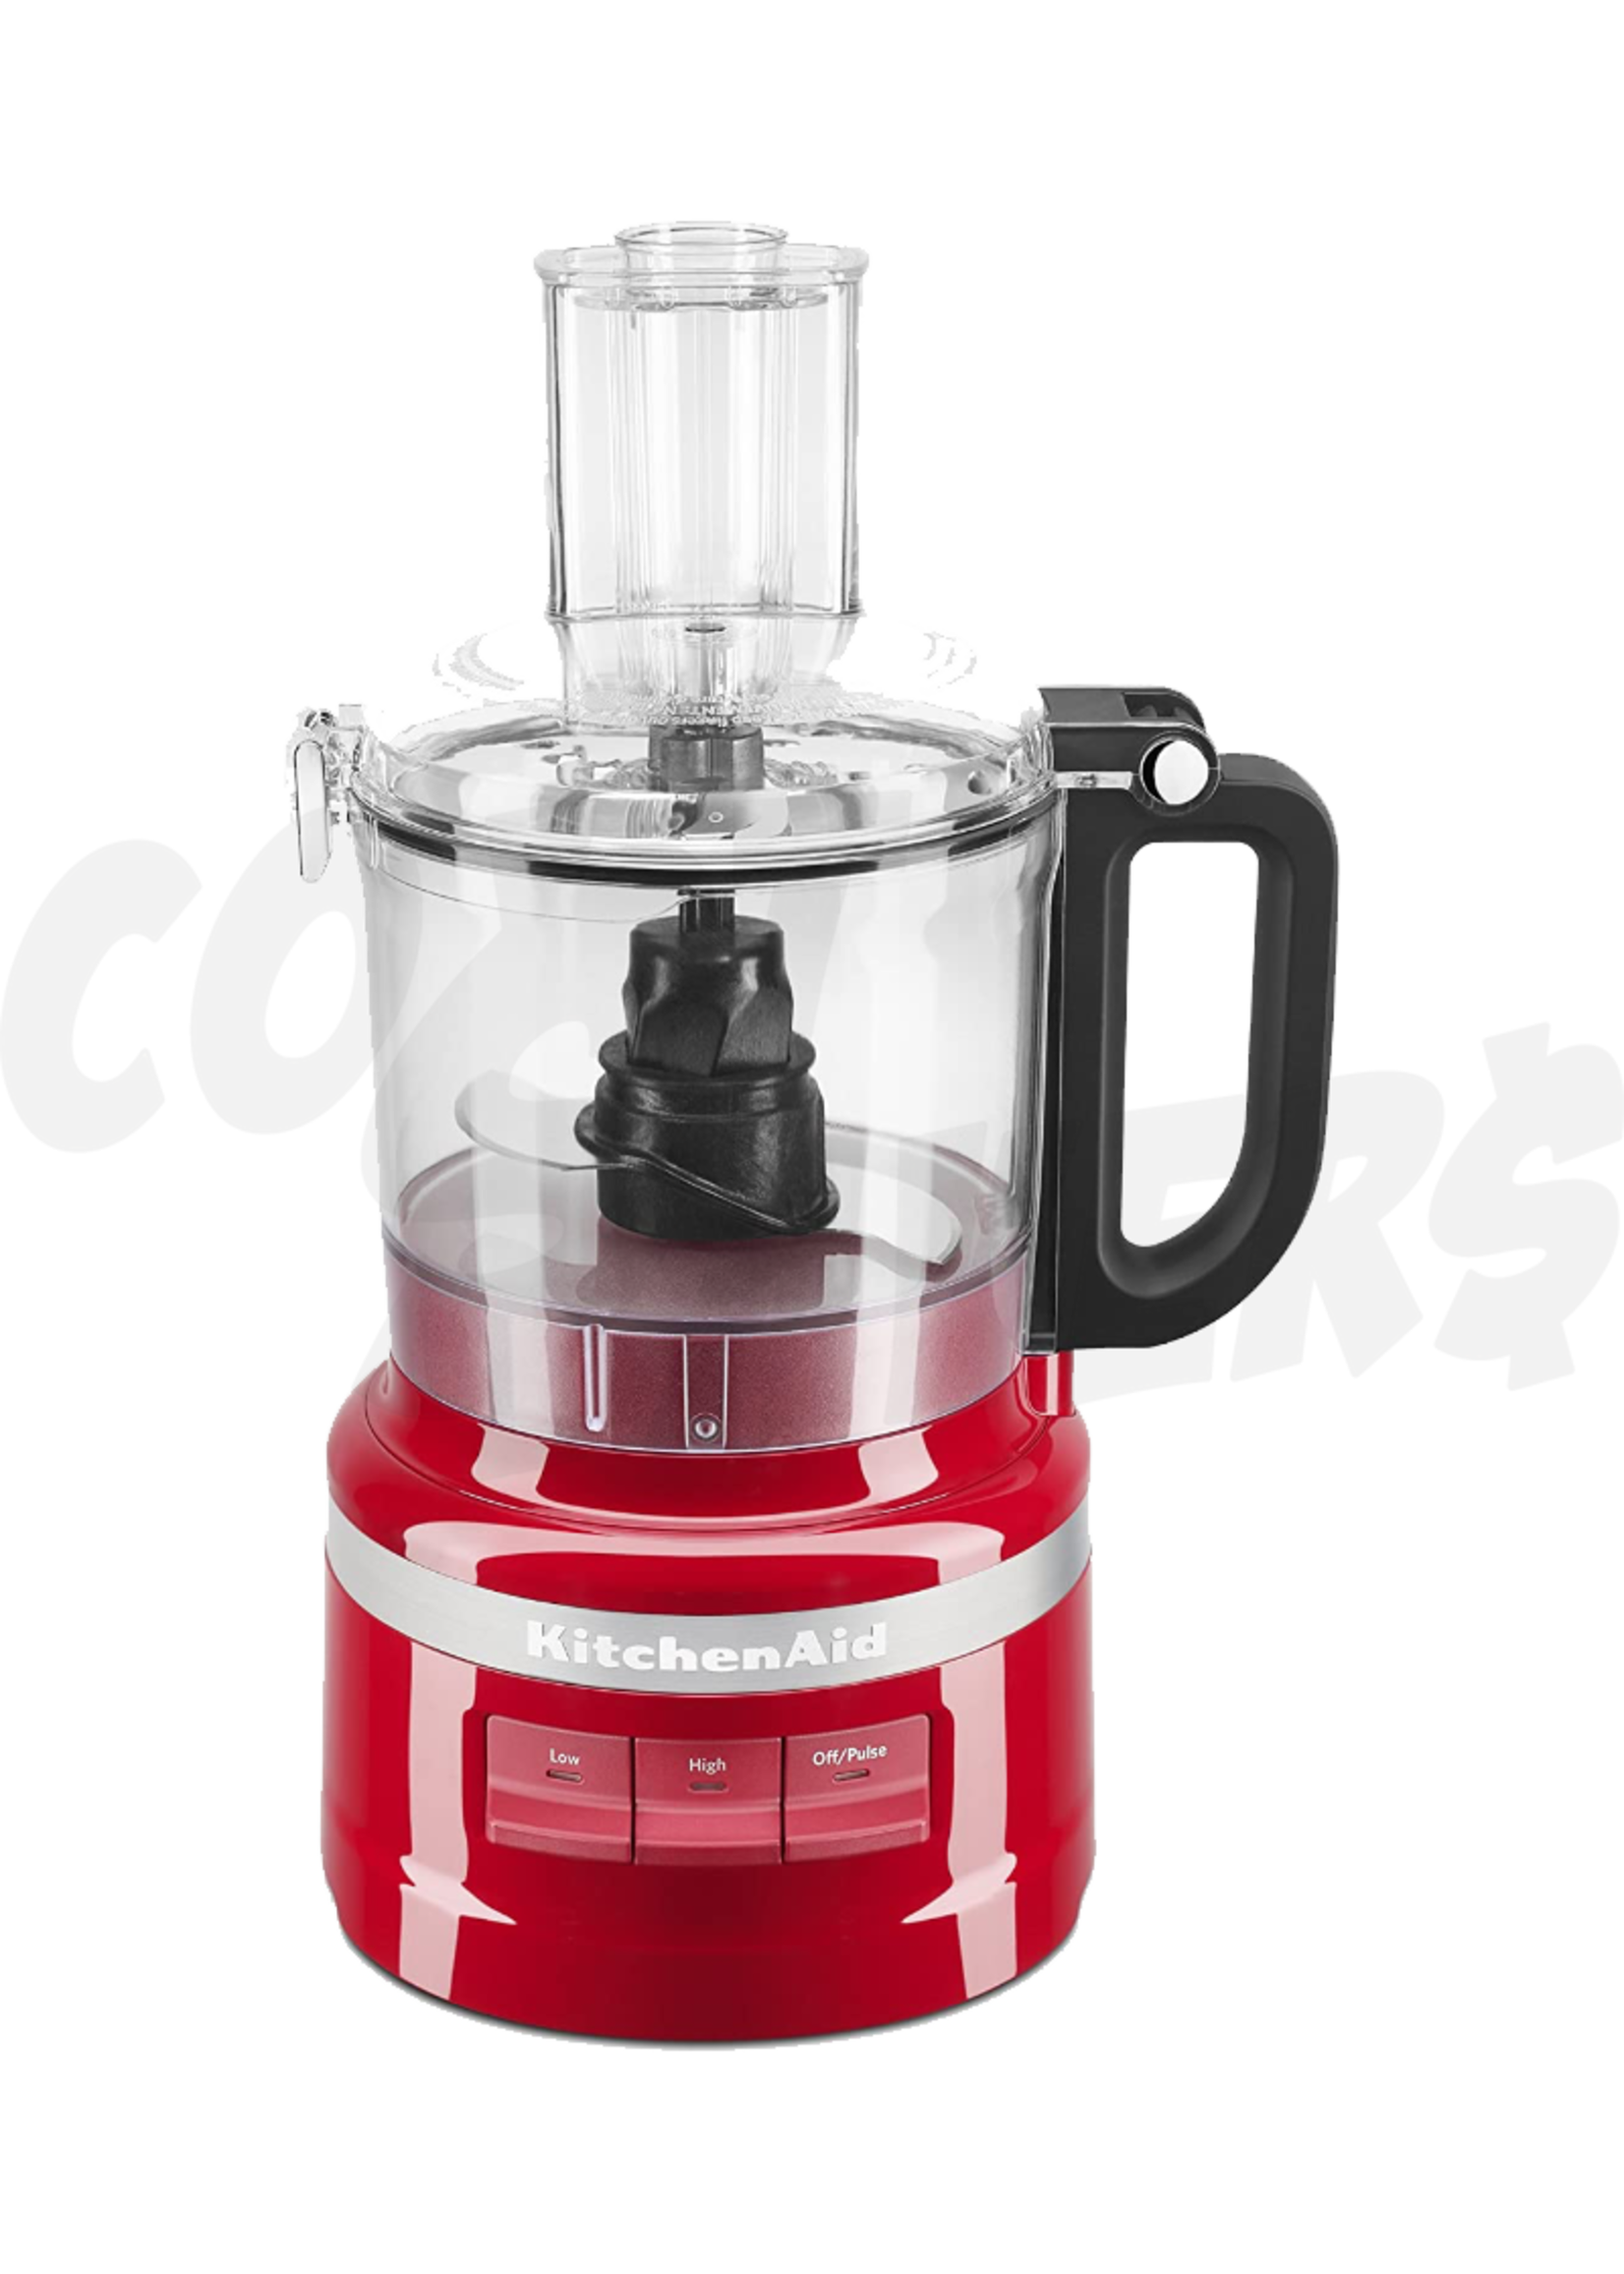 Kitchen Aid Kitchen Aid 7 Cup Food Processor (Red)